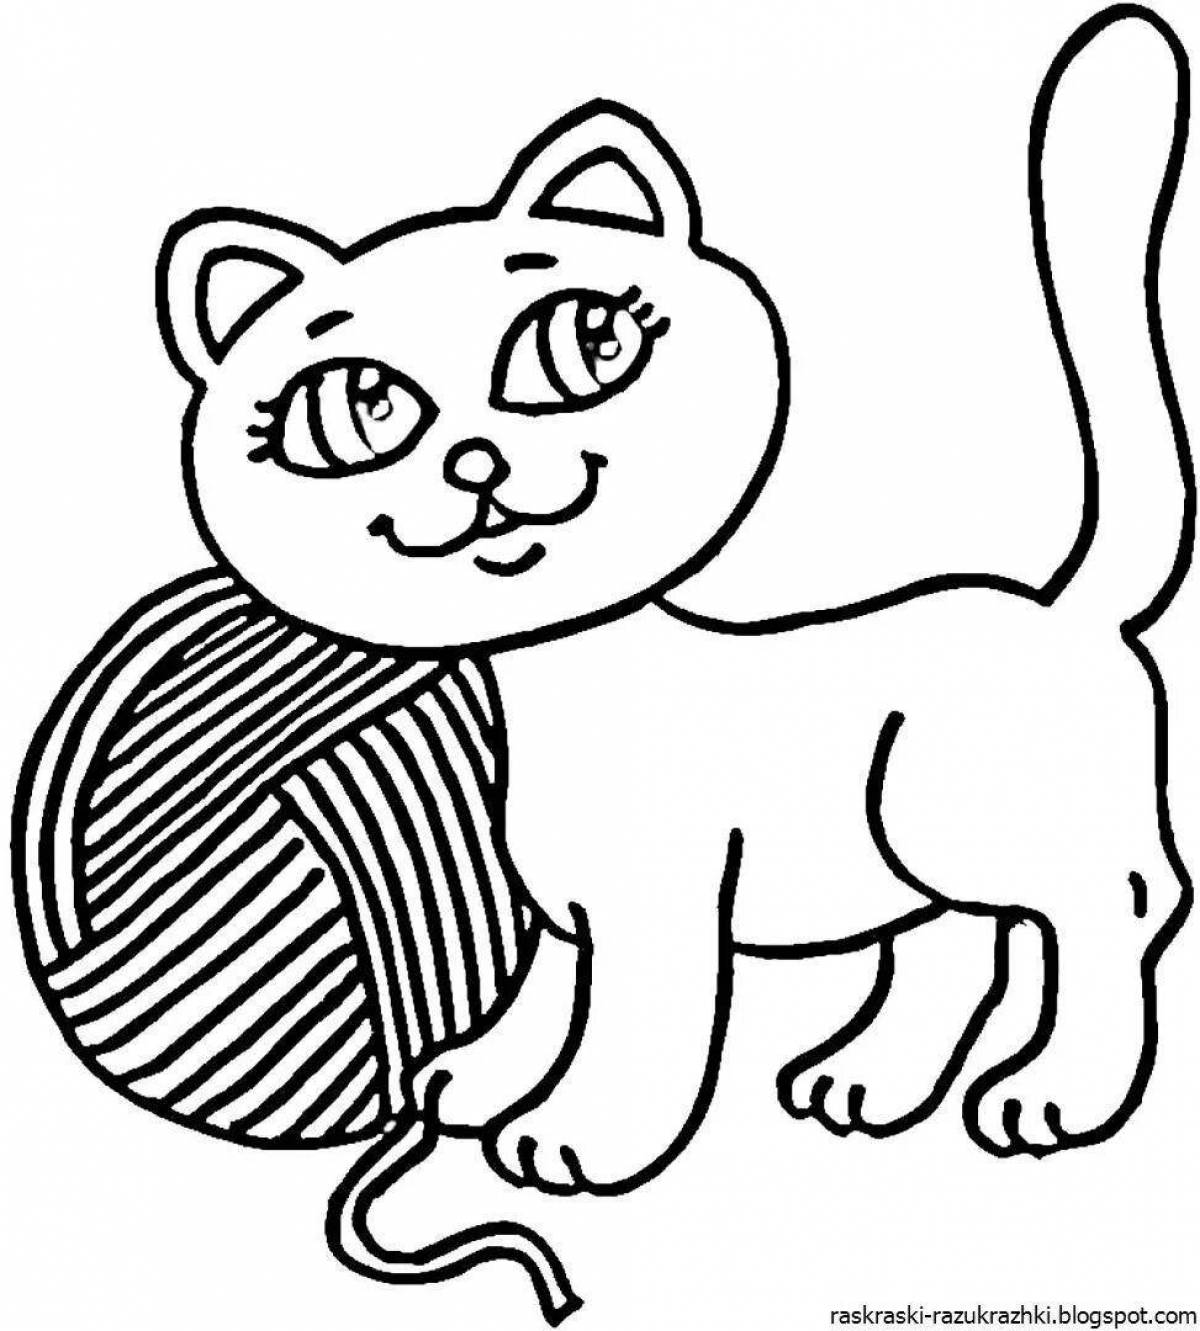 Bright coloring cat for children 2-3 years old